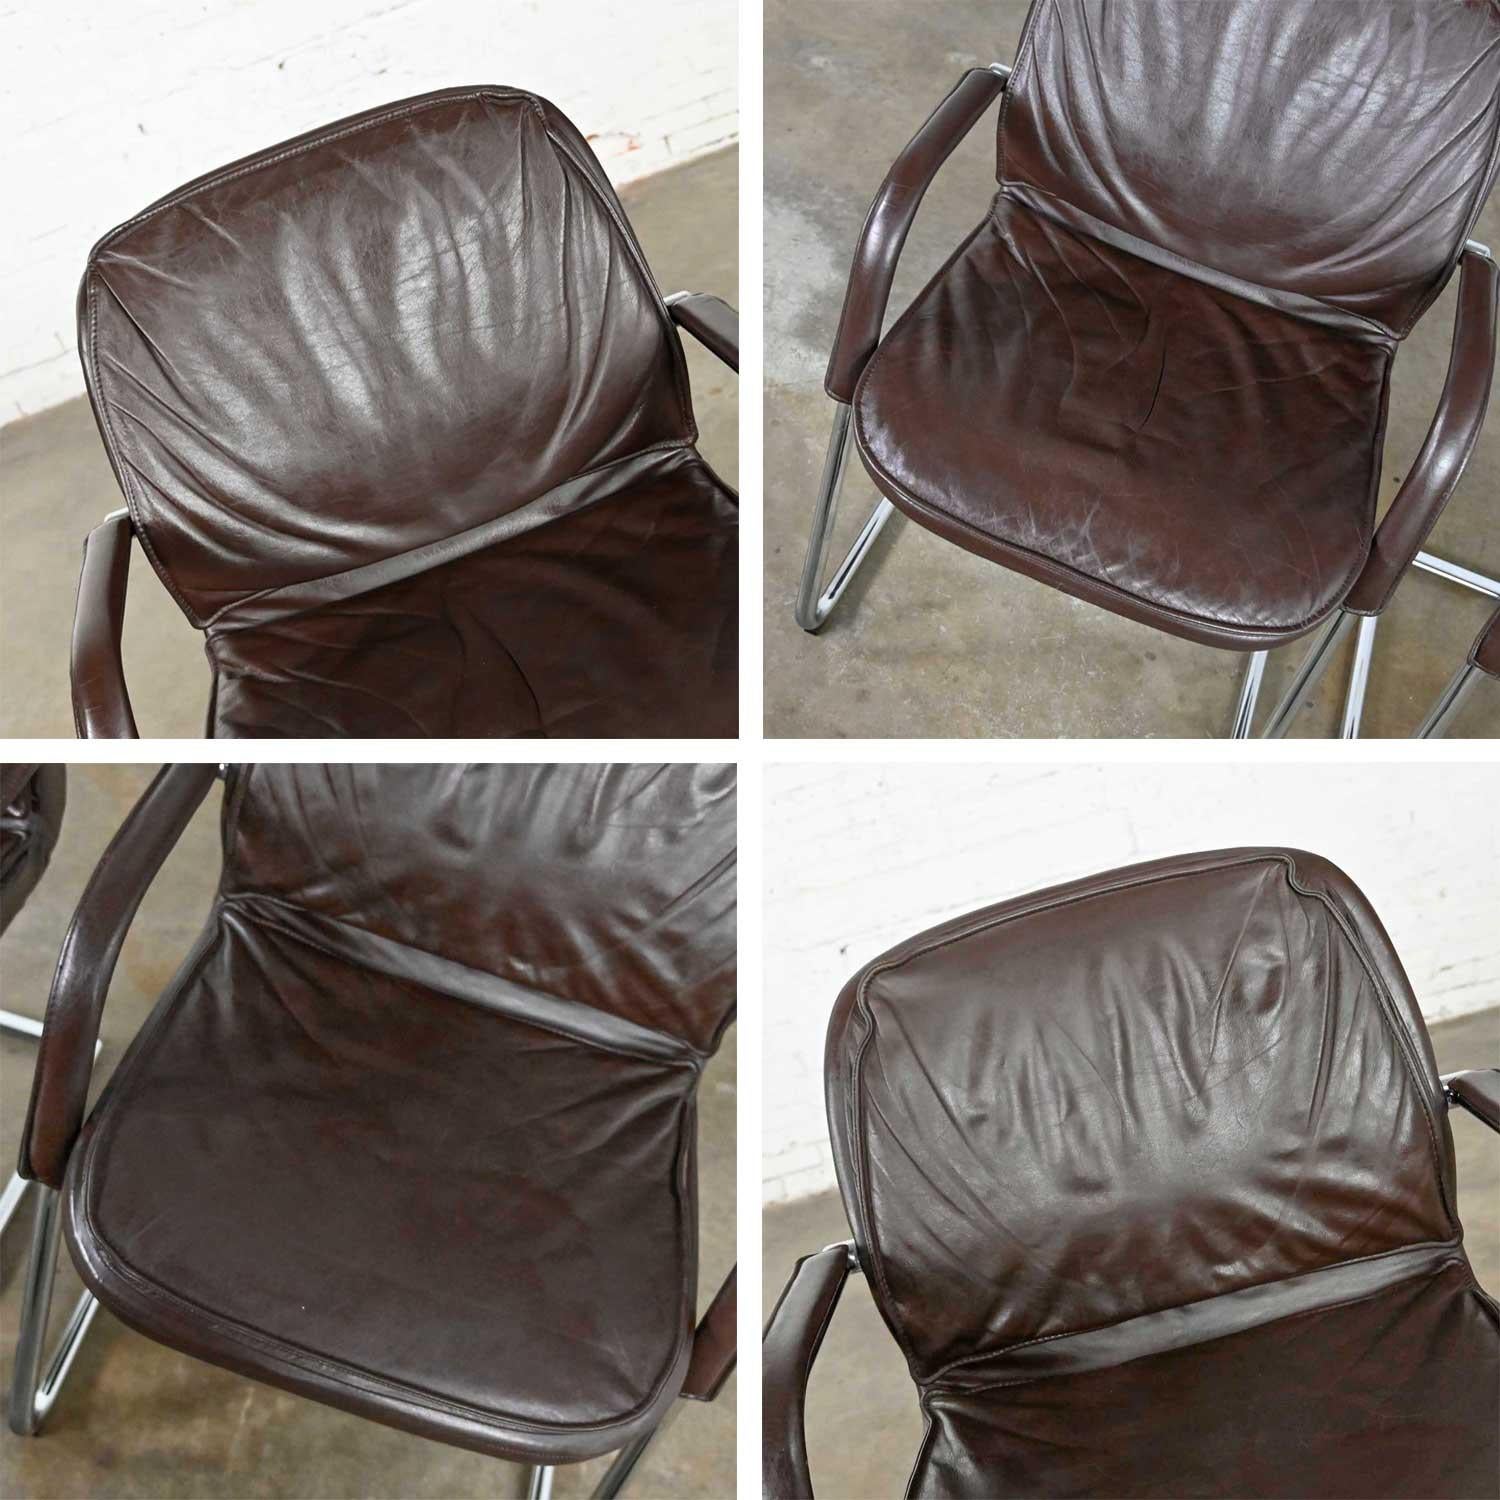 Vintage Modern Vecta Contract Brown Leather & Chrome Cantilever Pair of Chairs For Sale 6